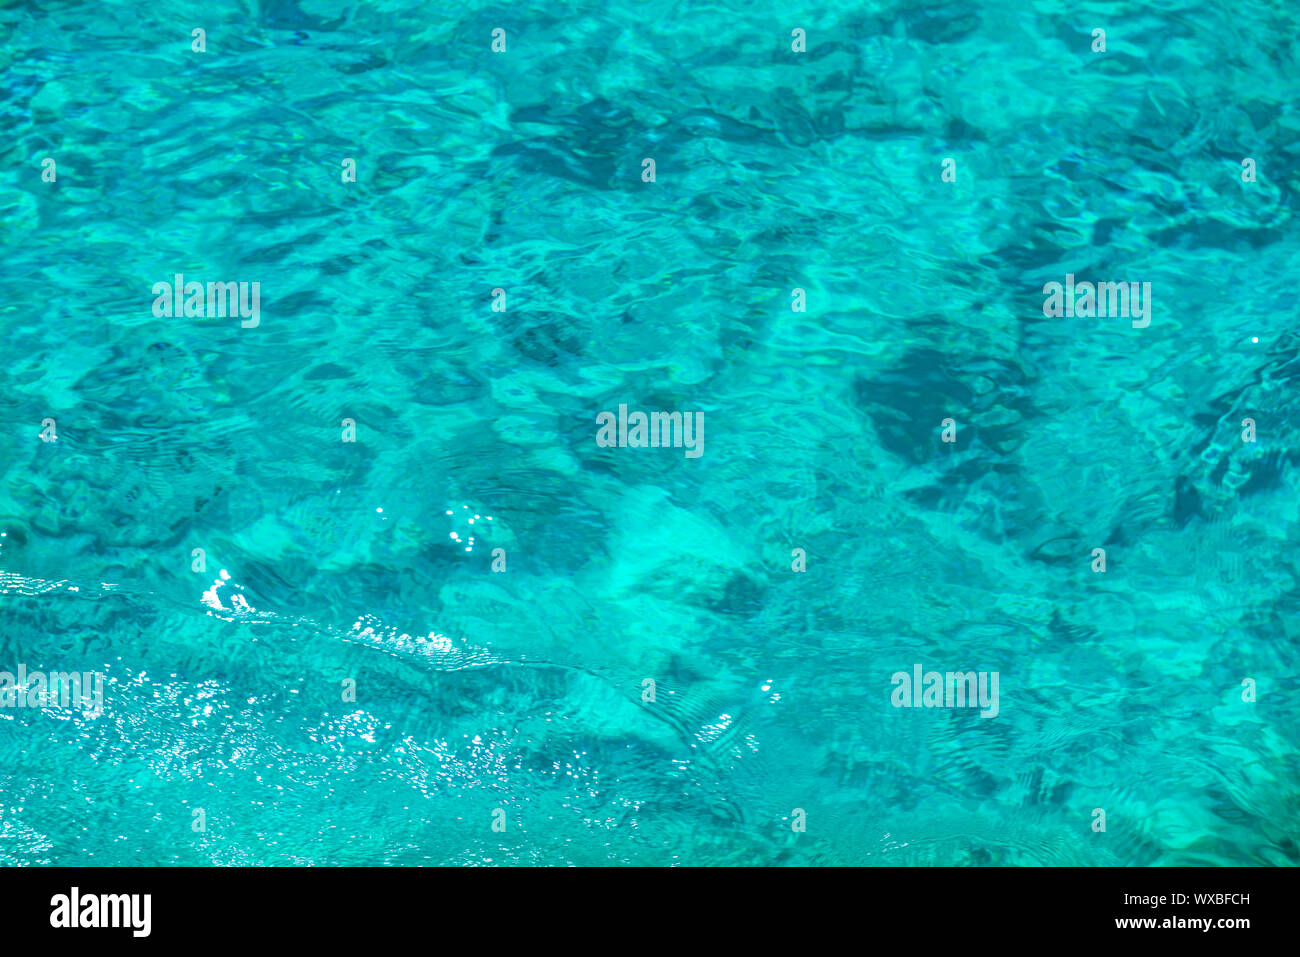 Texture of clear turquoise water surface Stock Photo